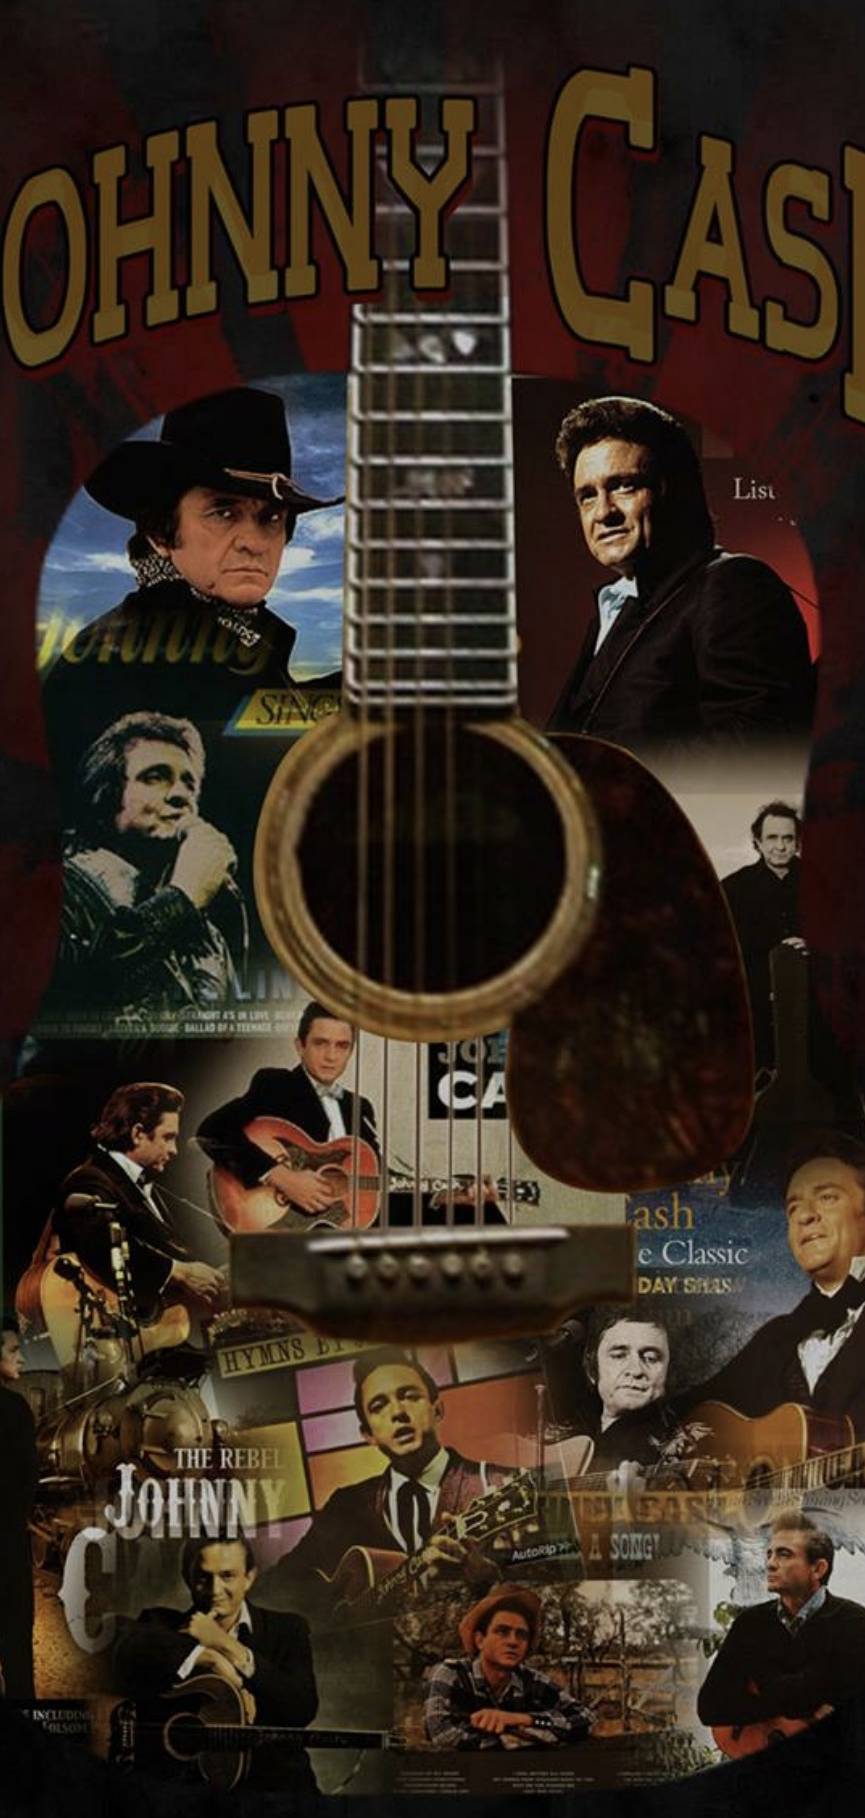 Happy 89th Birthday to the Man in Black himself...Johnny Cash! A legend that will live on forever. 